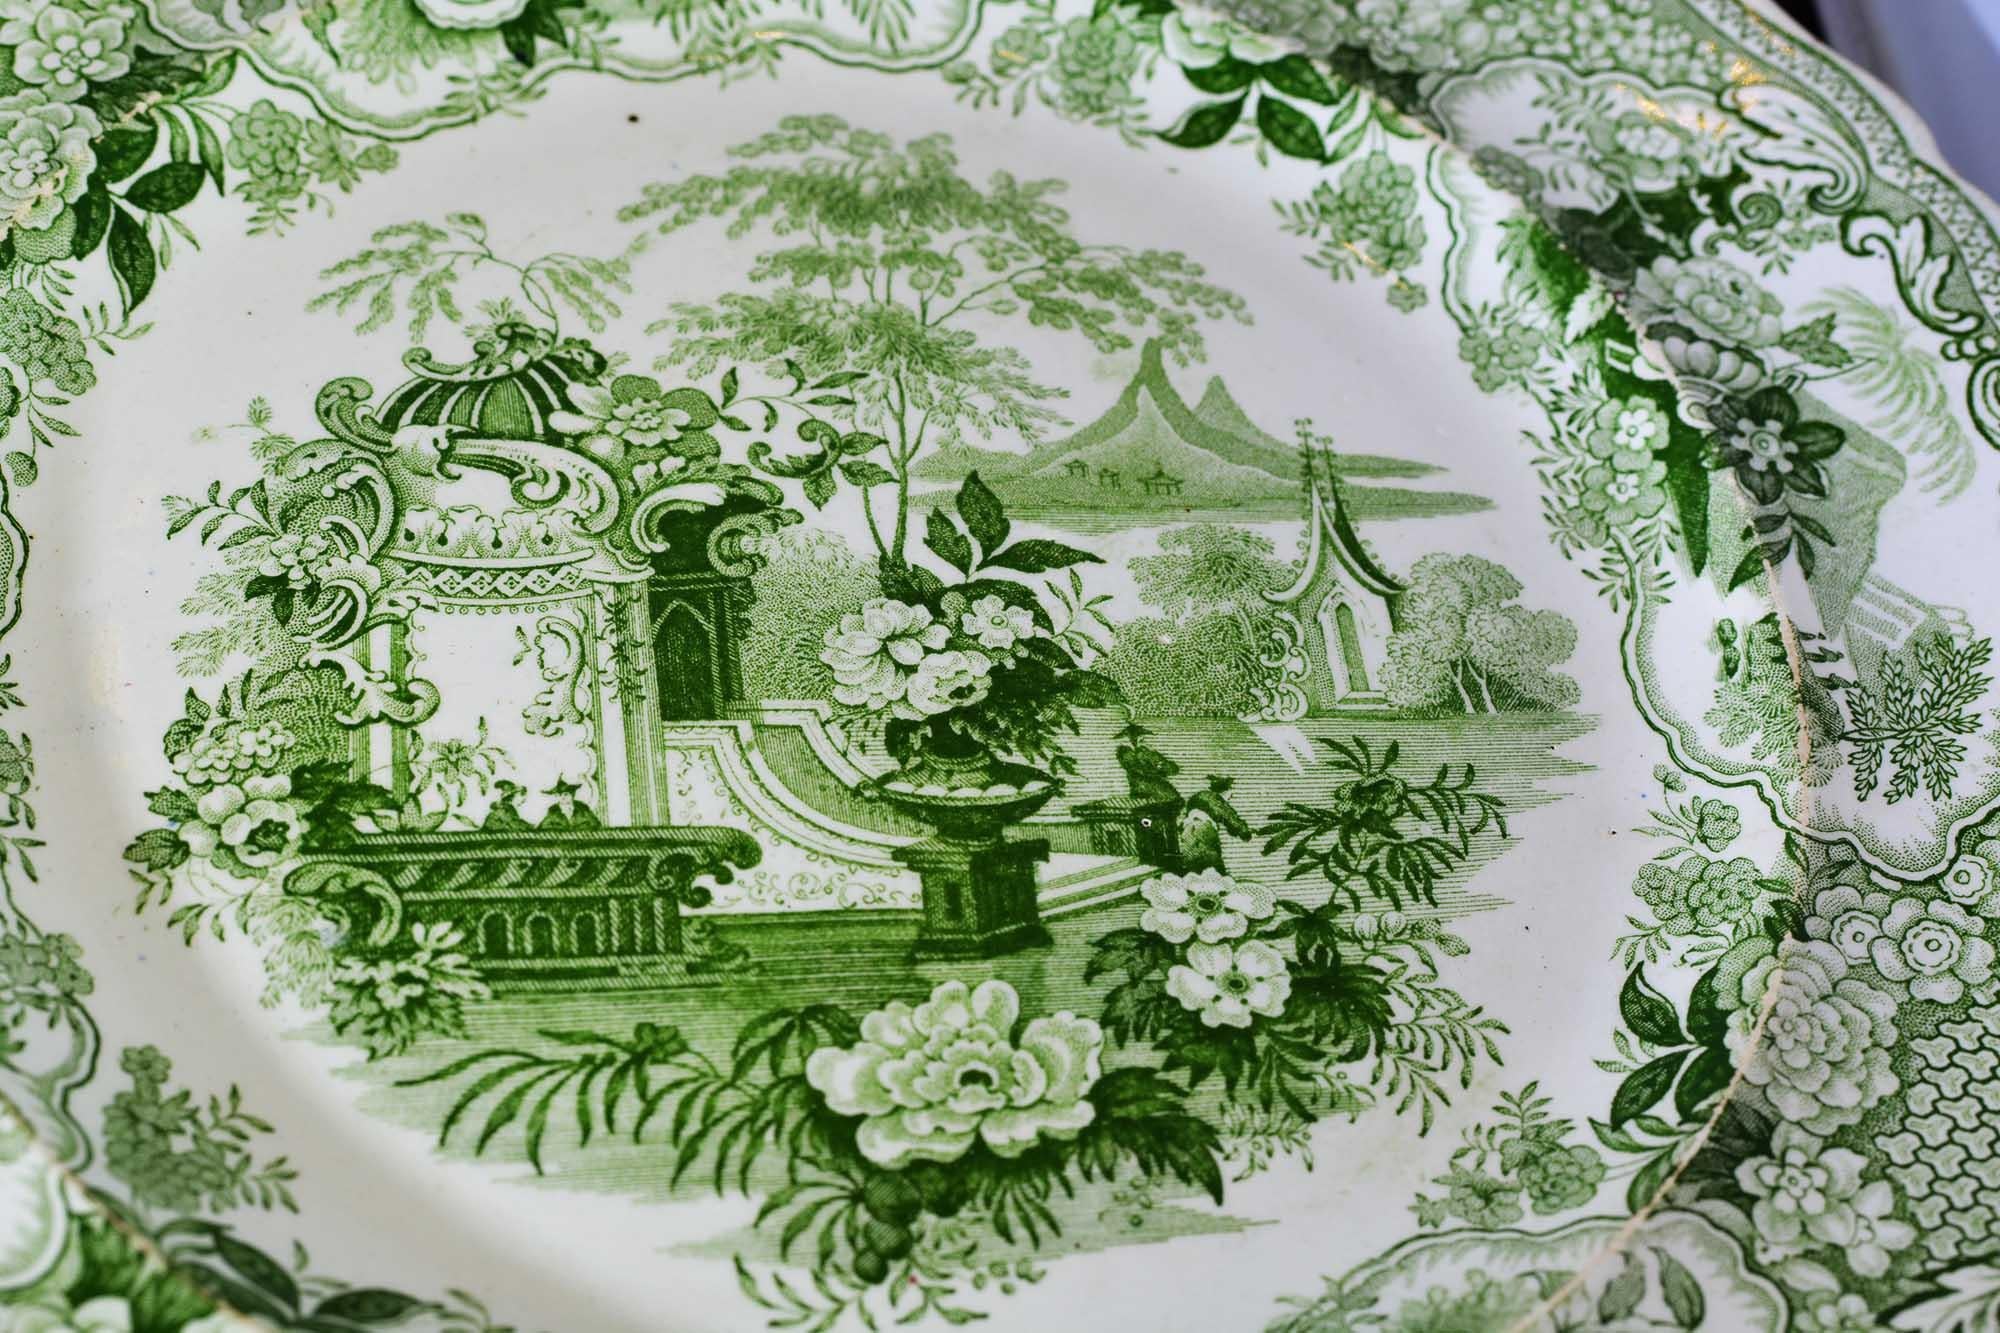 Antique Green Transferware Dinner Plates Sicilian and Verona Patterns In Good Condition For Sale In Pataskala, OH